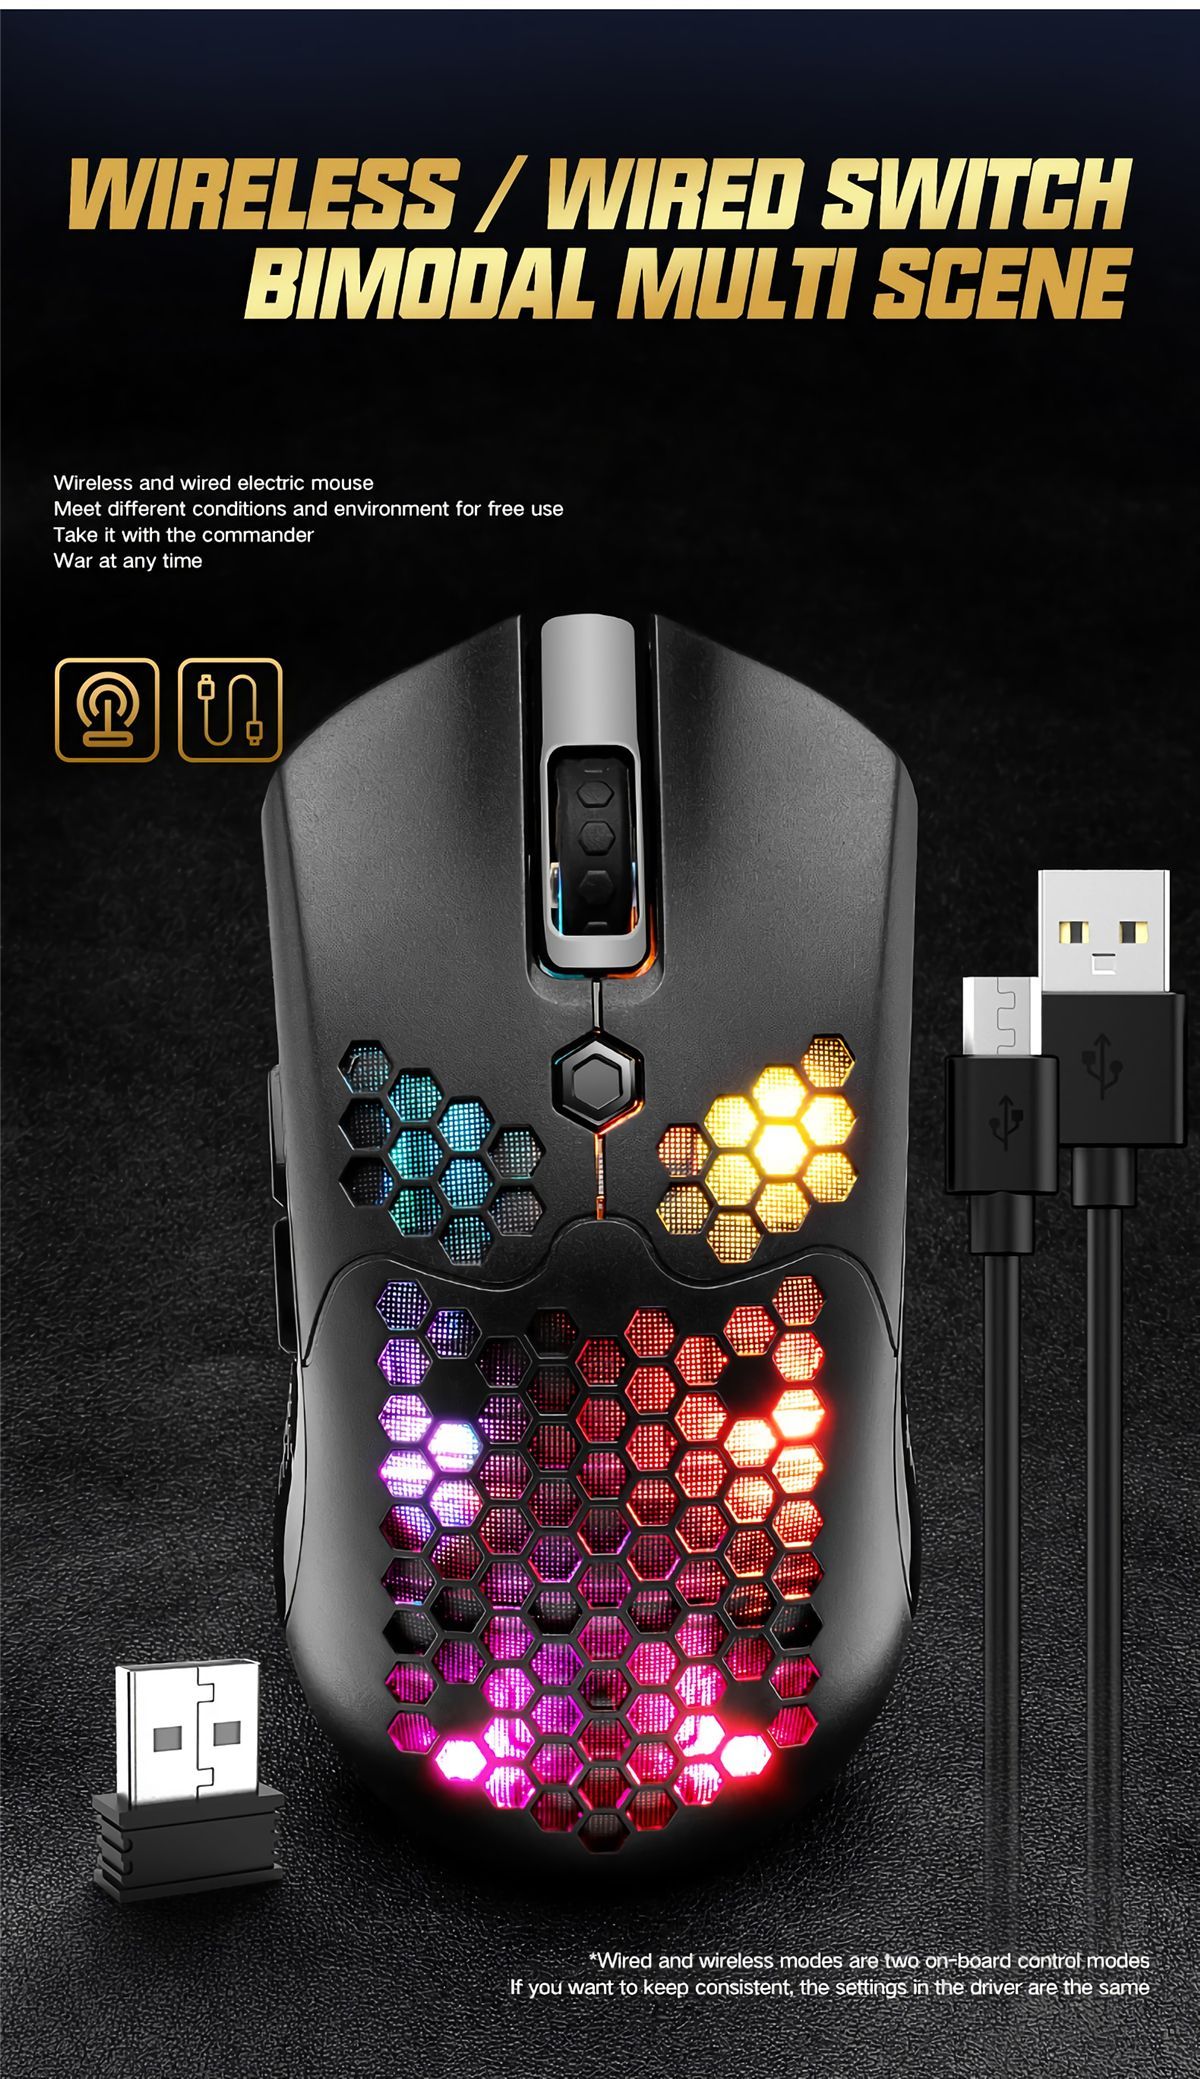 Free-wolf-X2-24G-Wireless-Gaming-Mouse-Hollow-Honeycomb-Rechargeable-12000DPI-7-Buttons-Ergonomic-RG-1738379